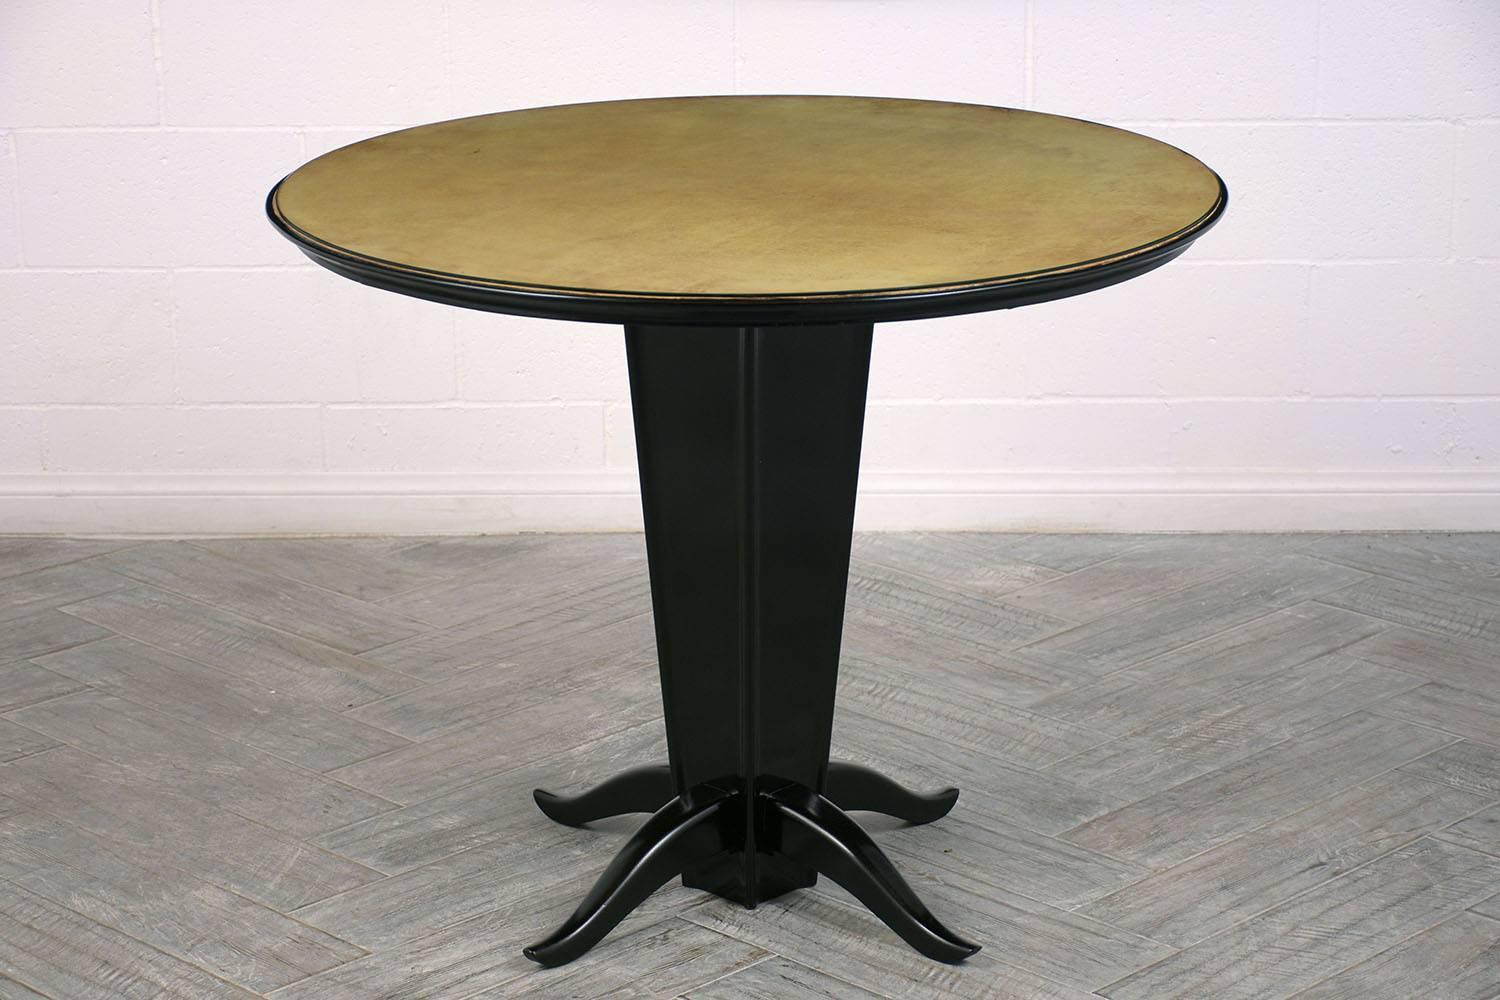 This 1930s Italian modern-style center table is made of mahogany wood with a leather top. The mahogany pedestal base has four stabilizing feet with curved ends and an ebonized and lacquered finish. The original leather top is dyed a light green